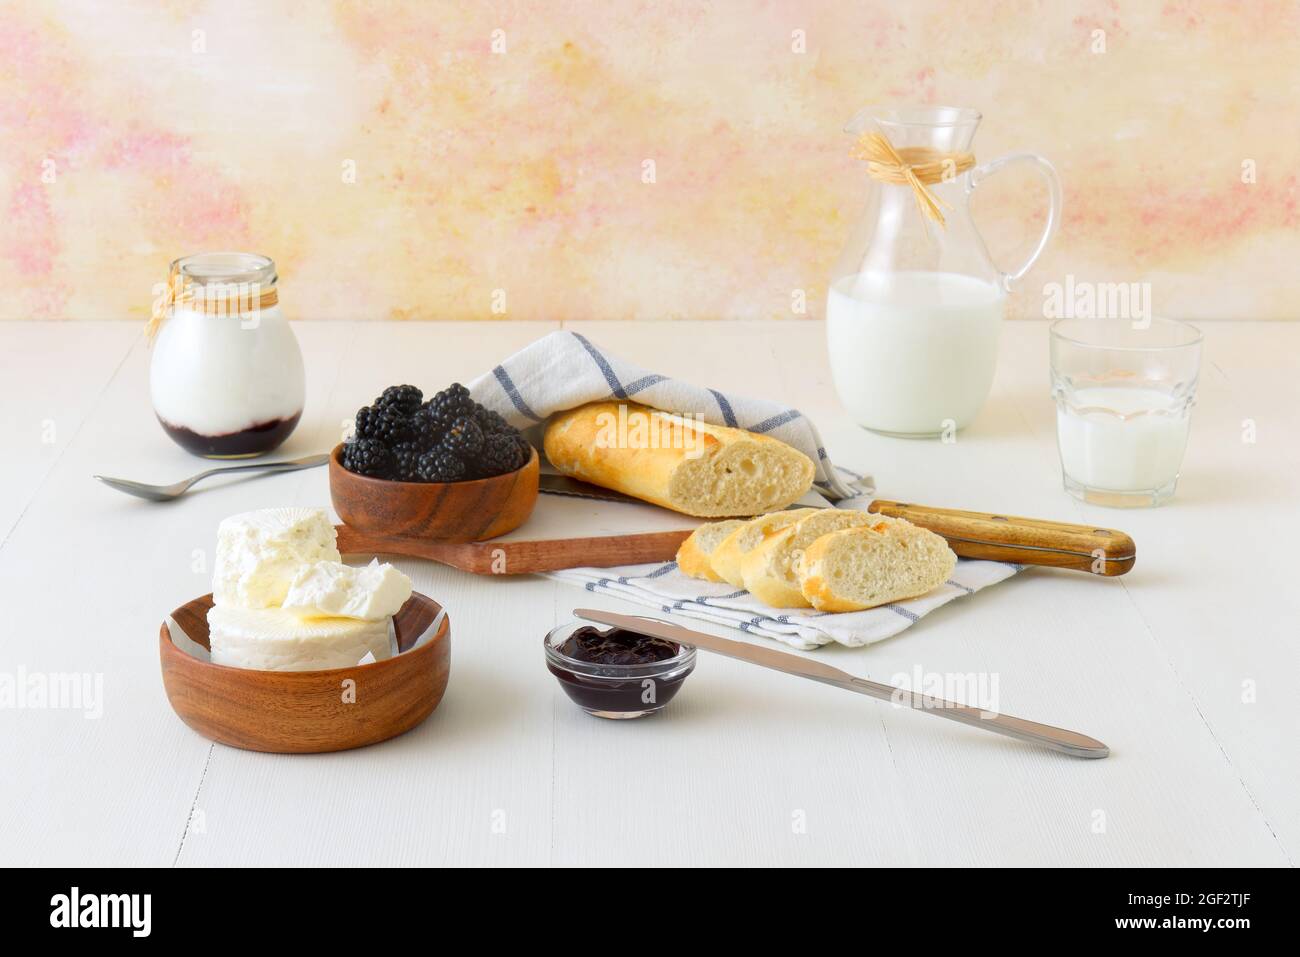 Bowl of blackberries, fresh cheese, milk, yoghurt and bread, a table set for breakfast, ingredients from the local farmers market. Low angle view. Stock Photo